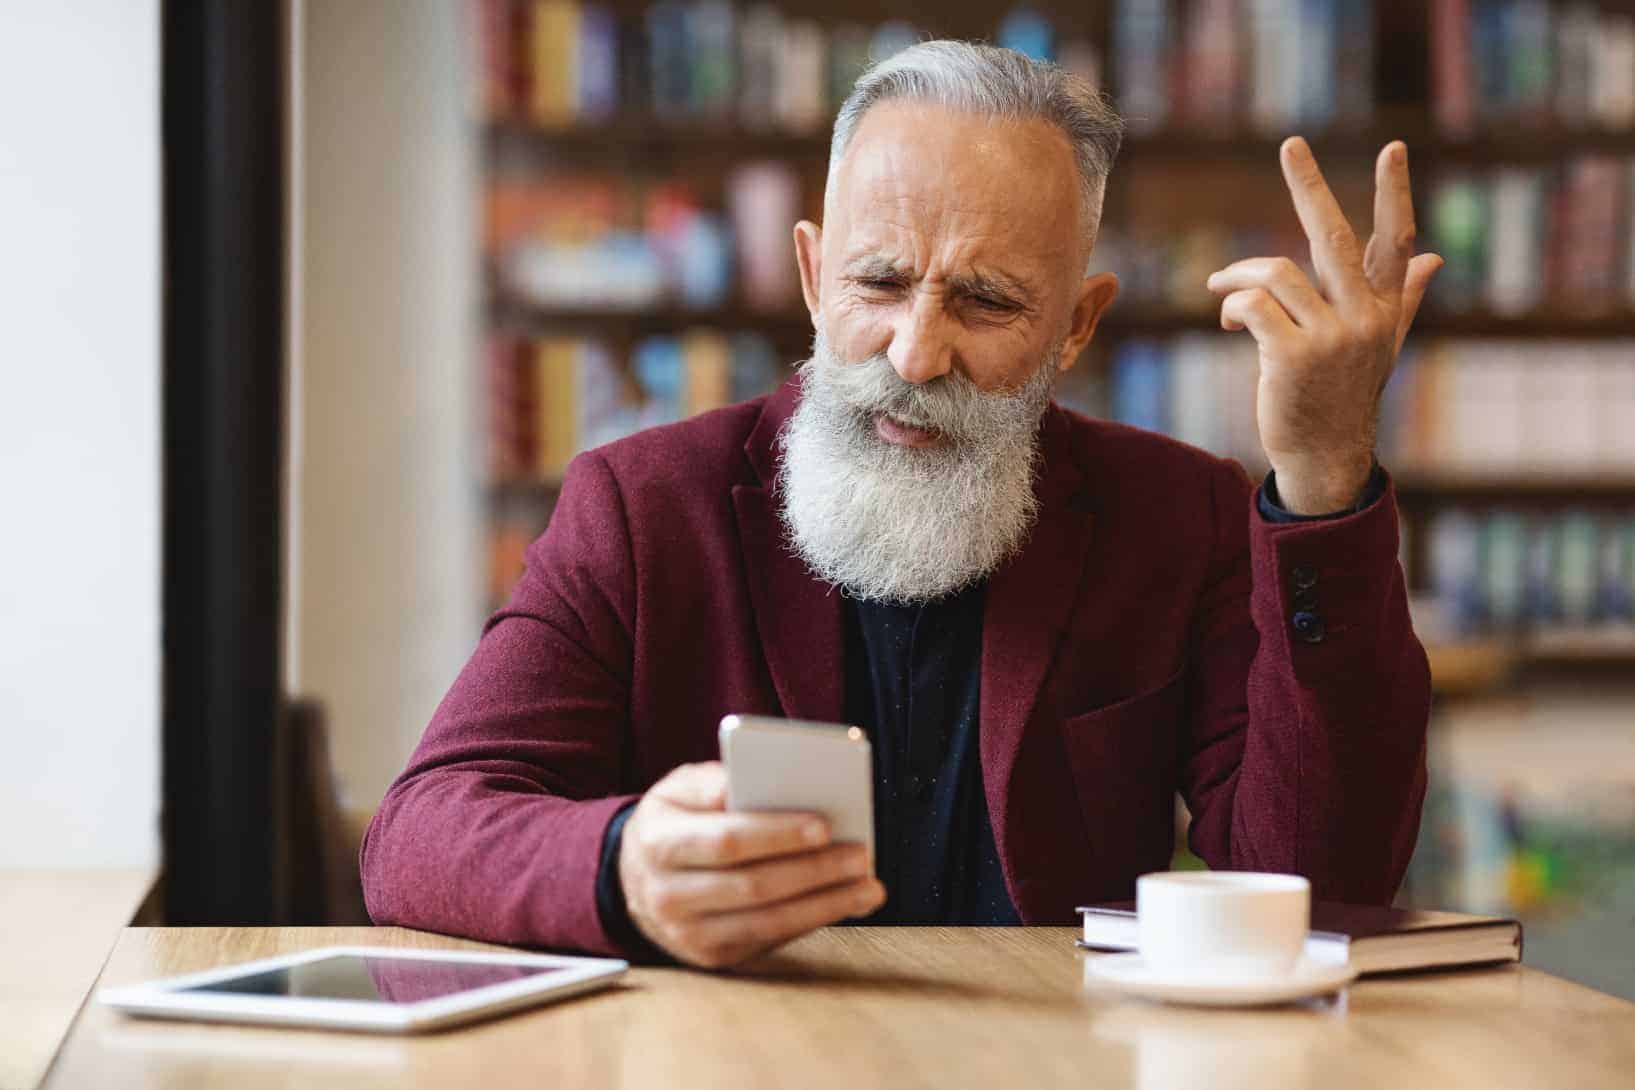 frustrated senior man using mobile phone at cafe